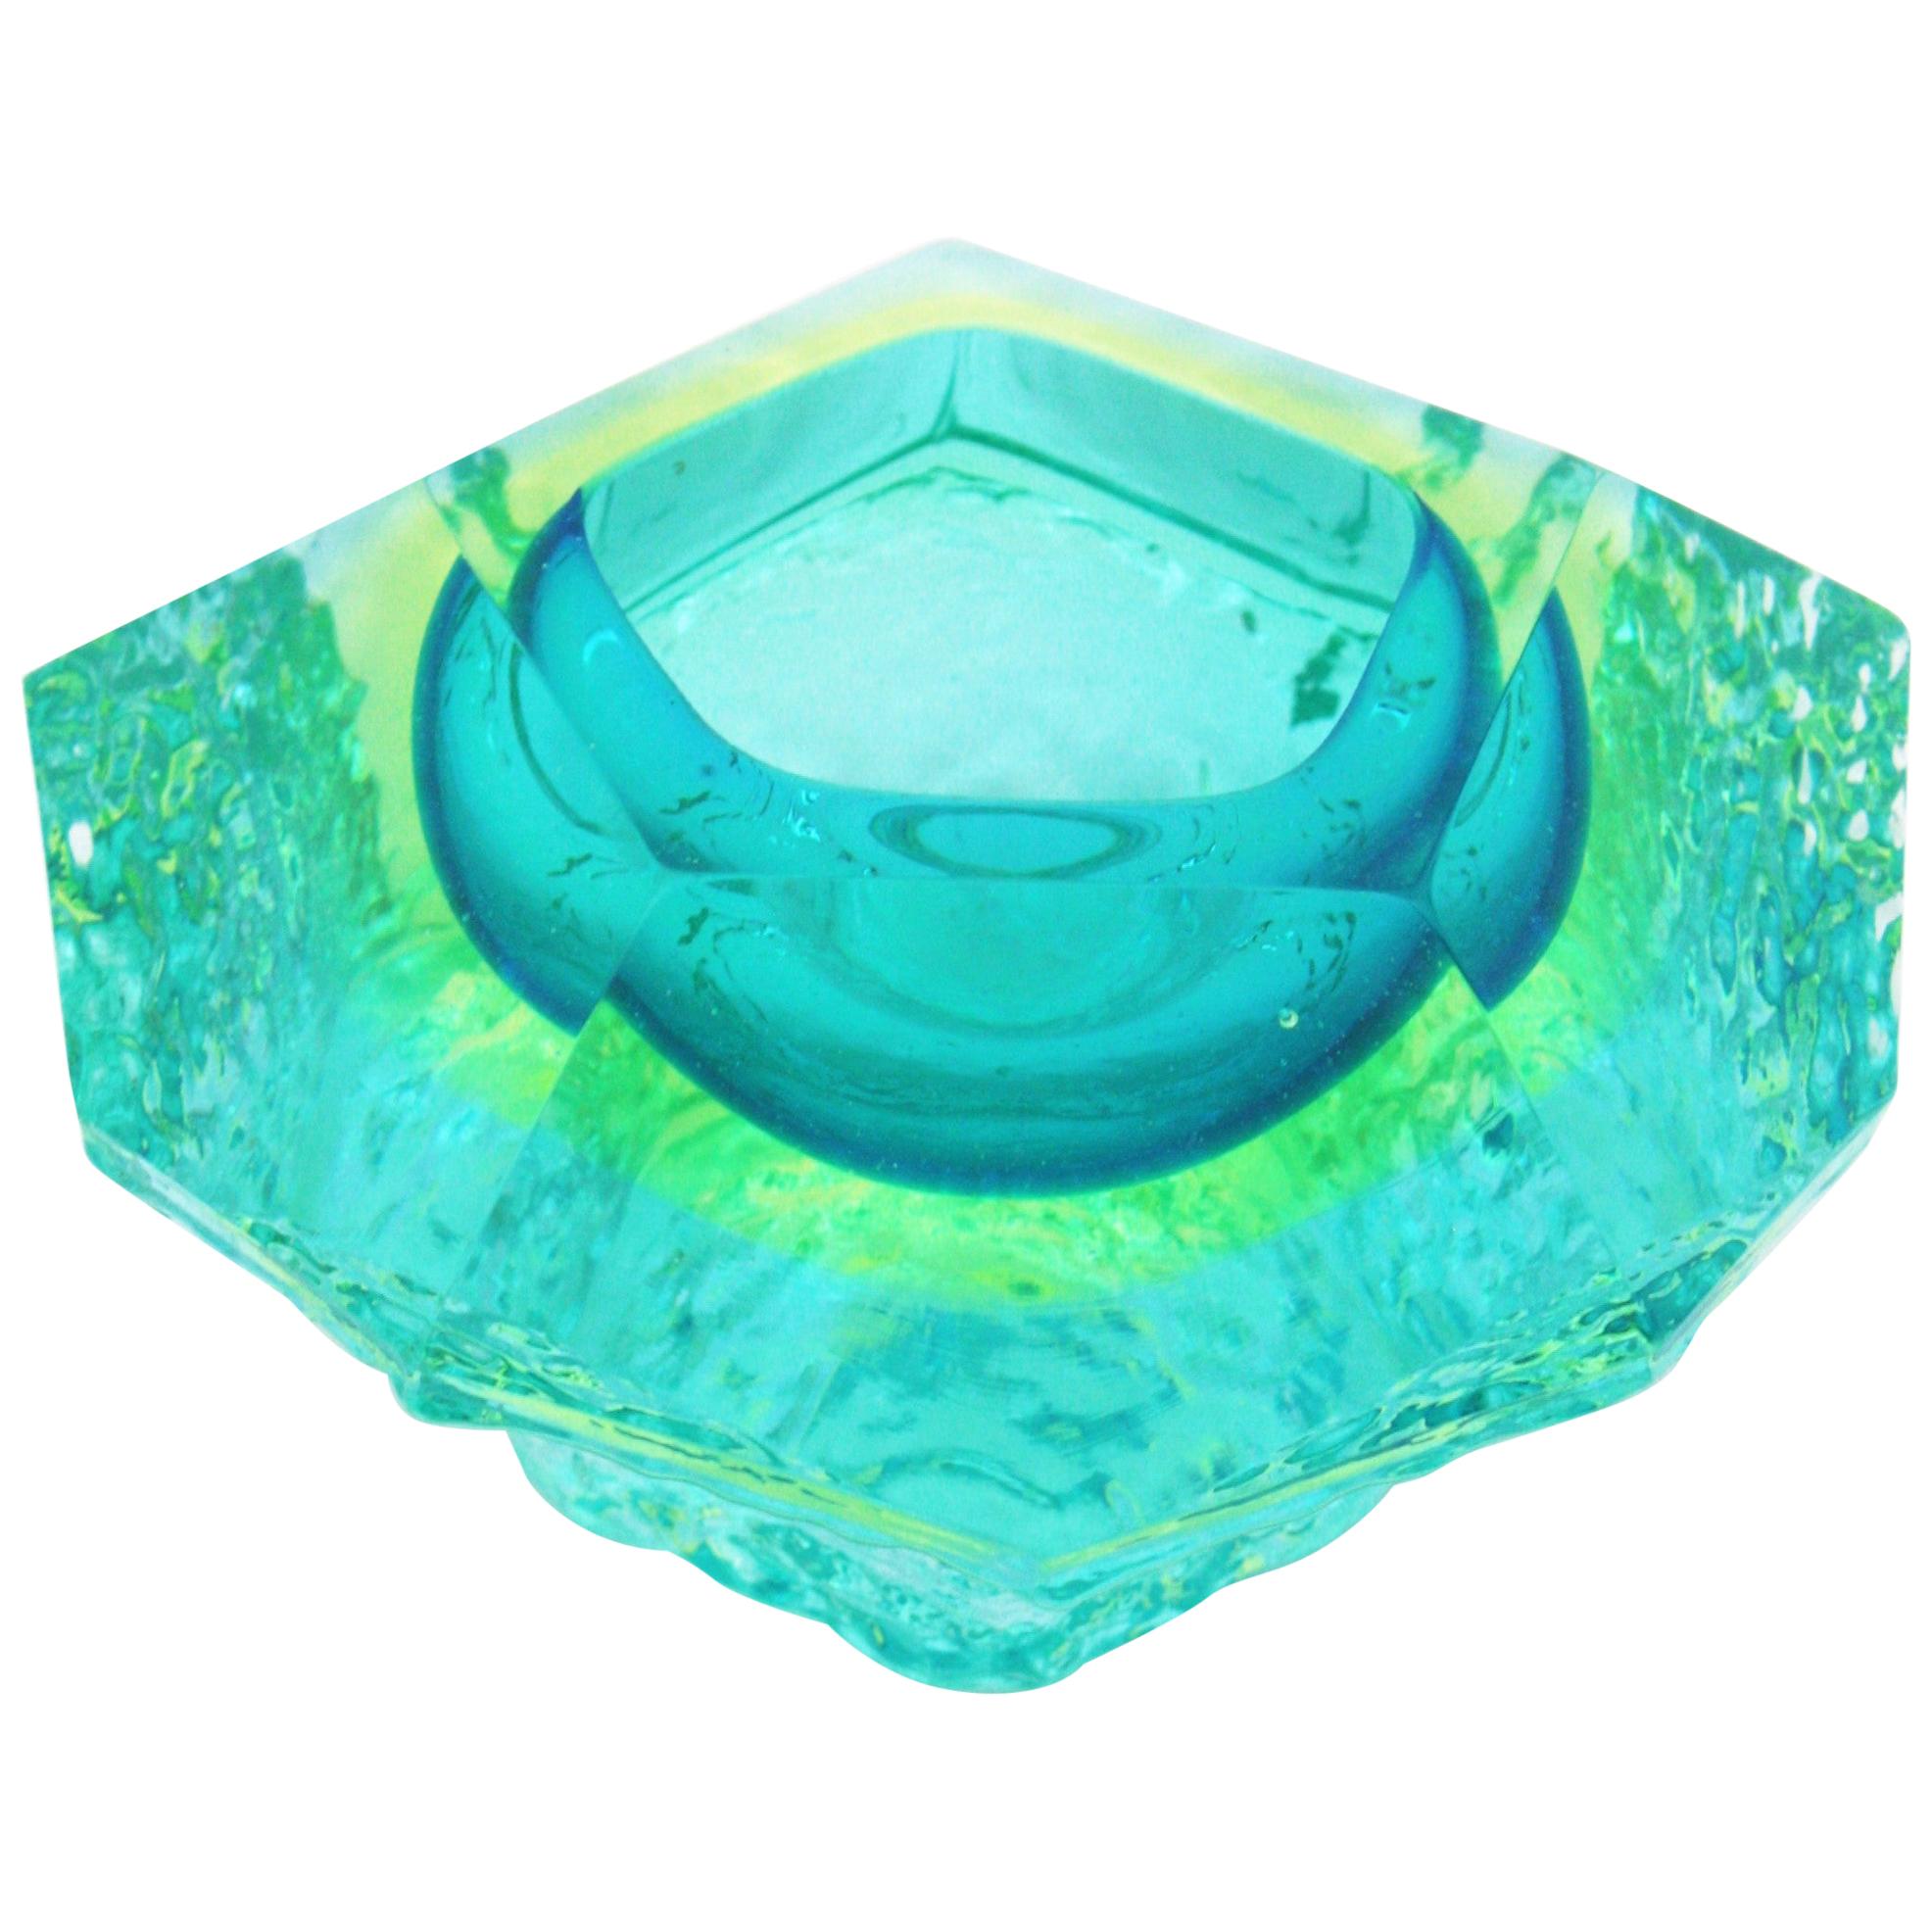 Mandruzzato Sommerso Mint Green Lime Blue Ice Glass Faceted Murano Bowl /Ashtray